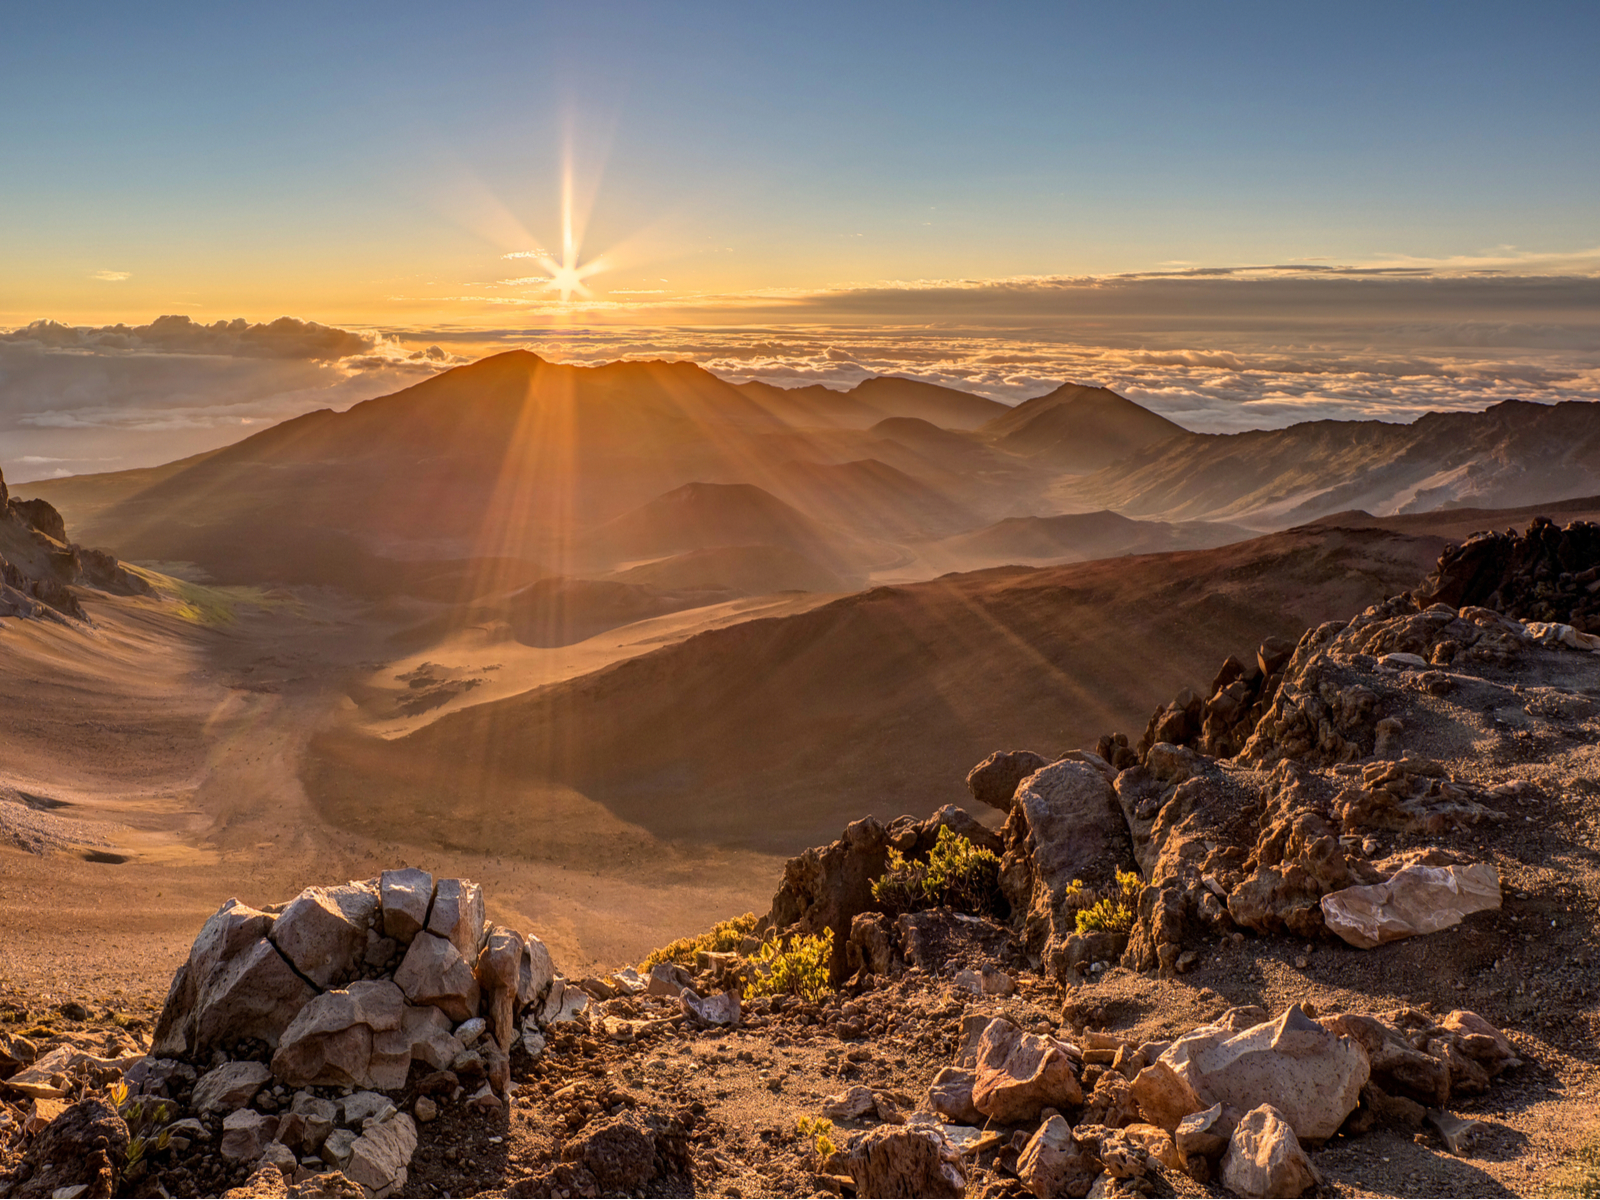 Haleakala volcano seen at sunrise for a roundup of things to do in Maui